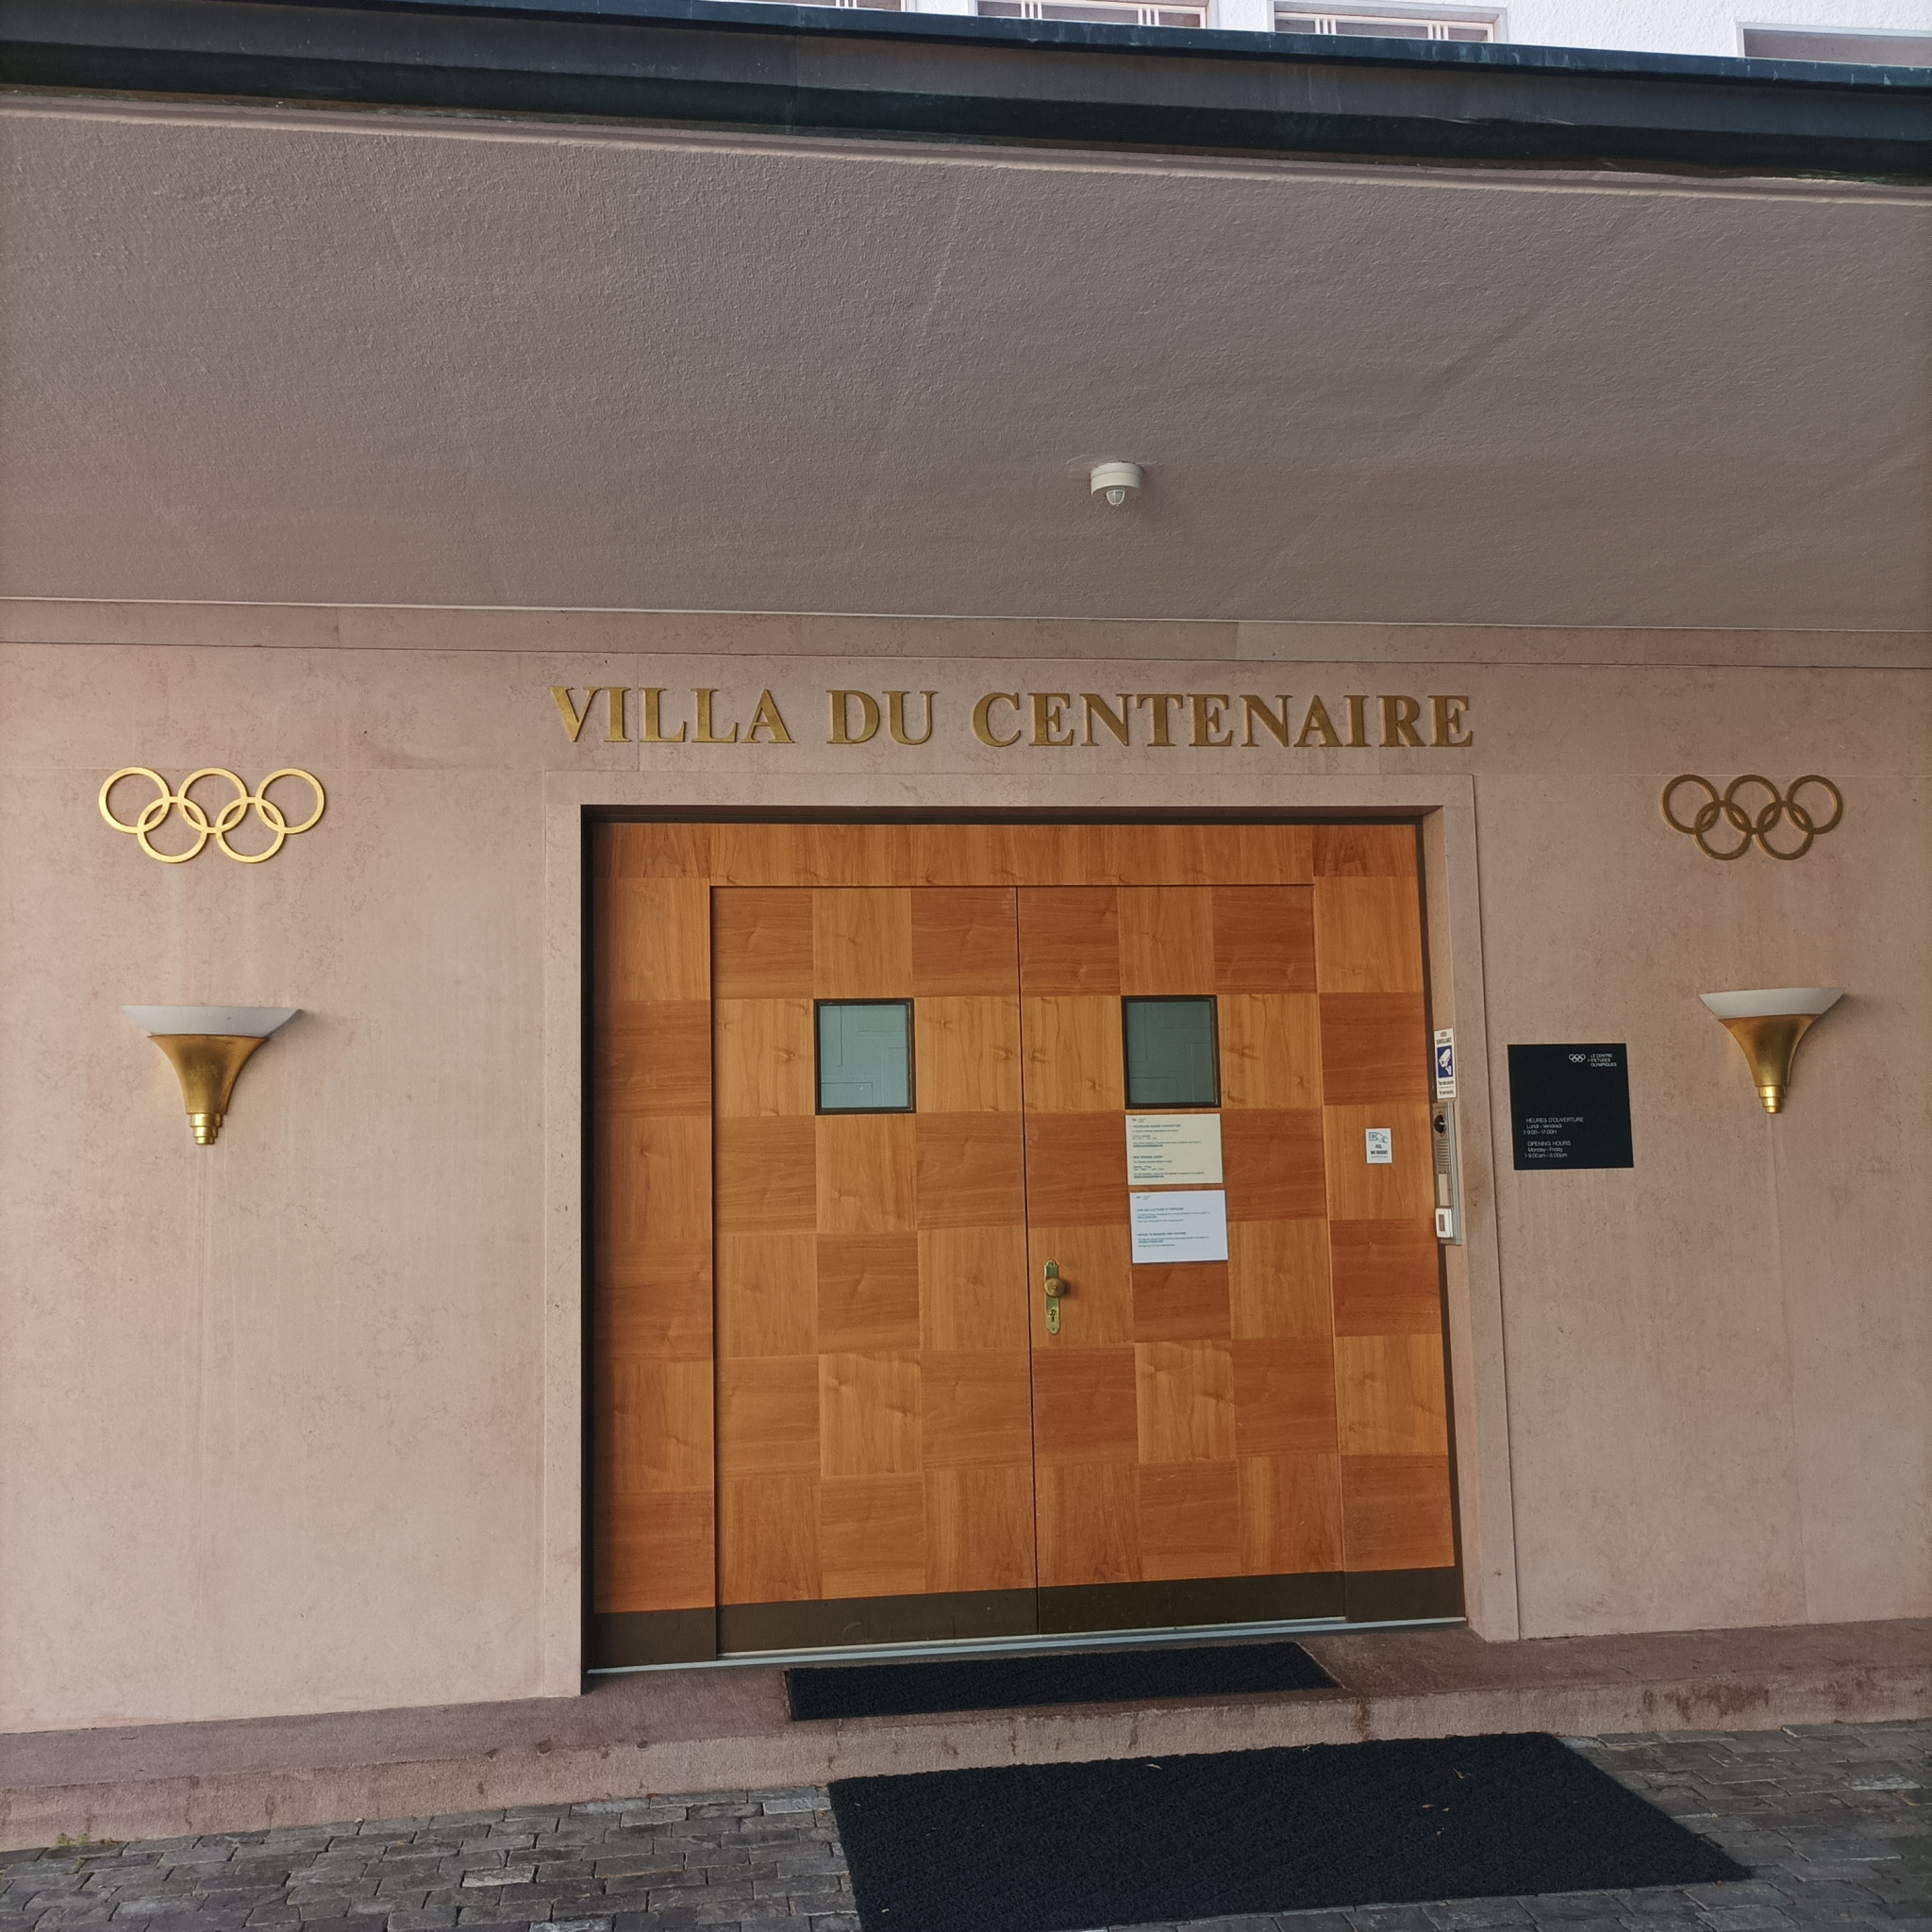 The Villa Centenaire in Lausanne houses the Olympic Studies Centre ©ITG